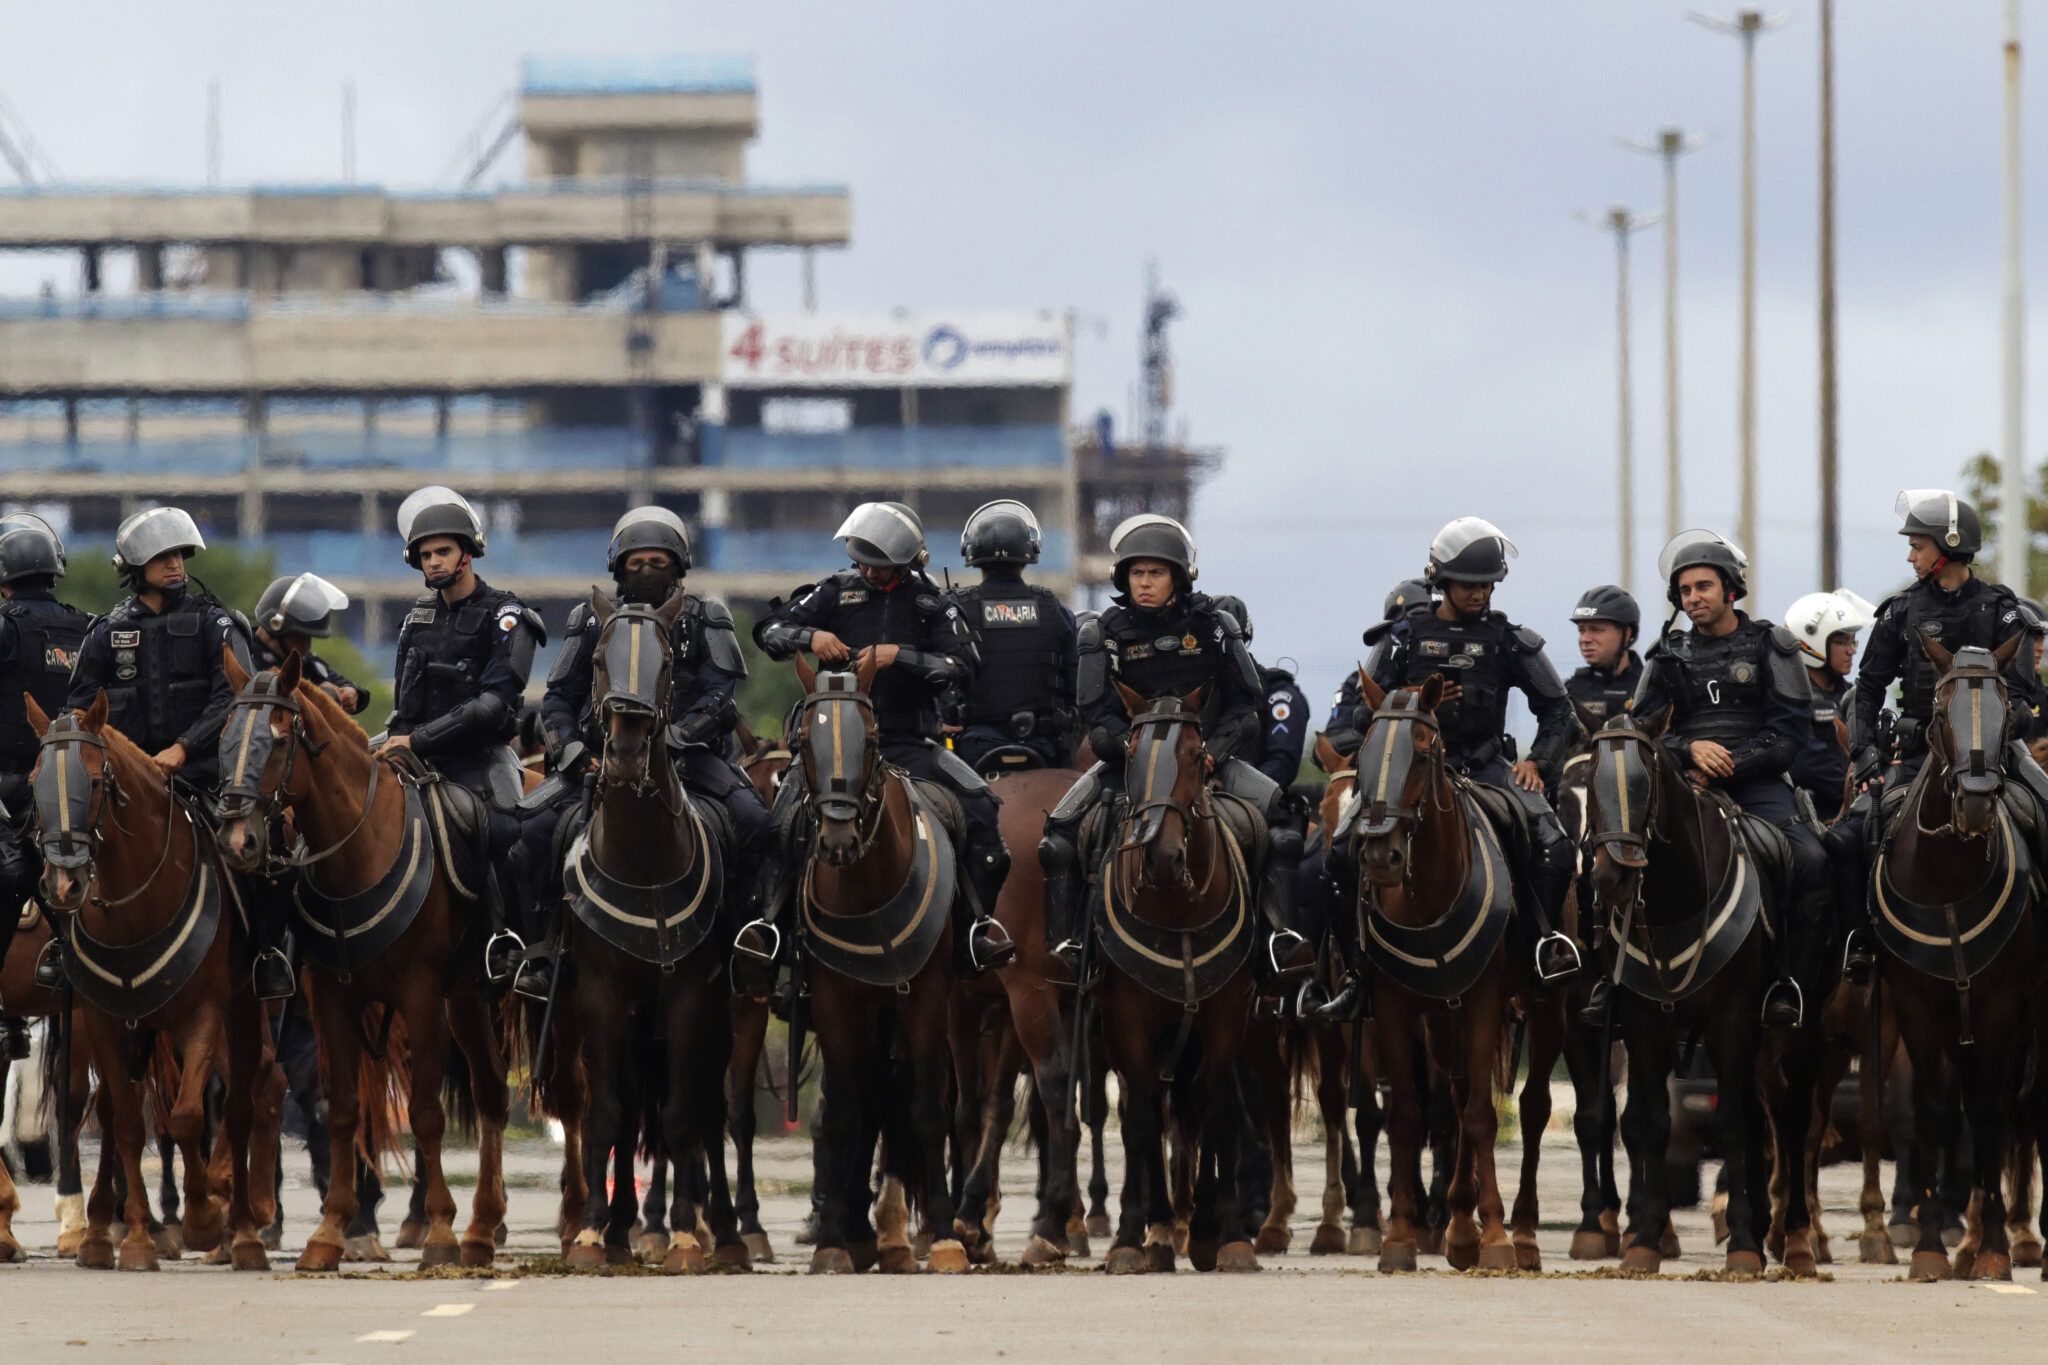 Mounted police watch as supporters of former Brazilian President Jair Bolsonaro depart their encampment outside army headquarters in Brasilia, Brazil, Monday, Jan. 9, 2023, the day after Bolsonaro supporters stormed government buildings in the capital. (AP Photo/Gustavo Moreno)